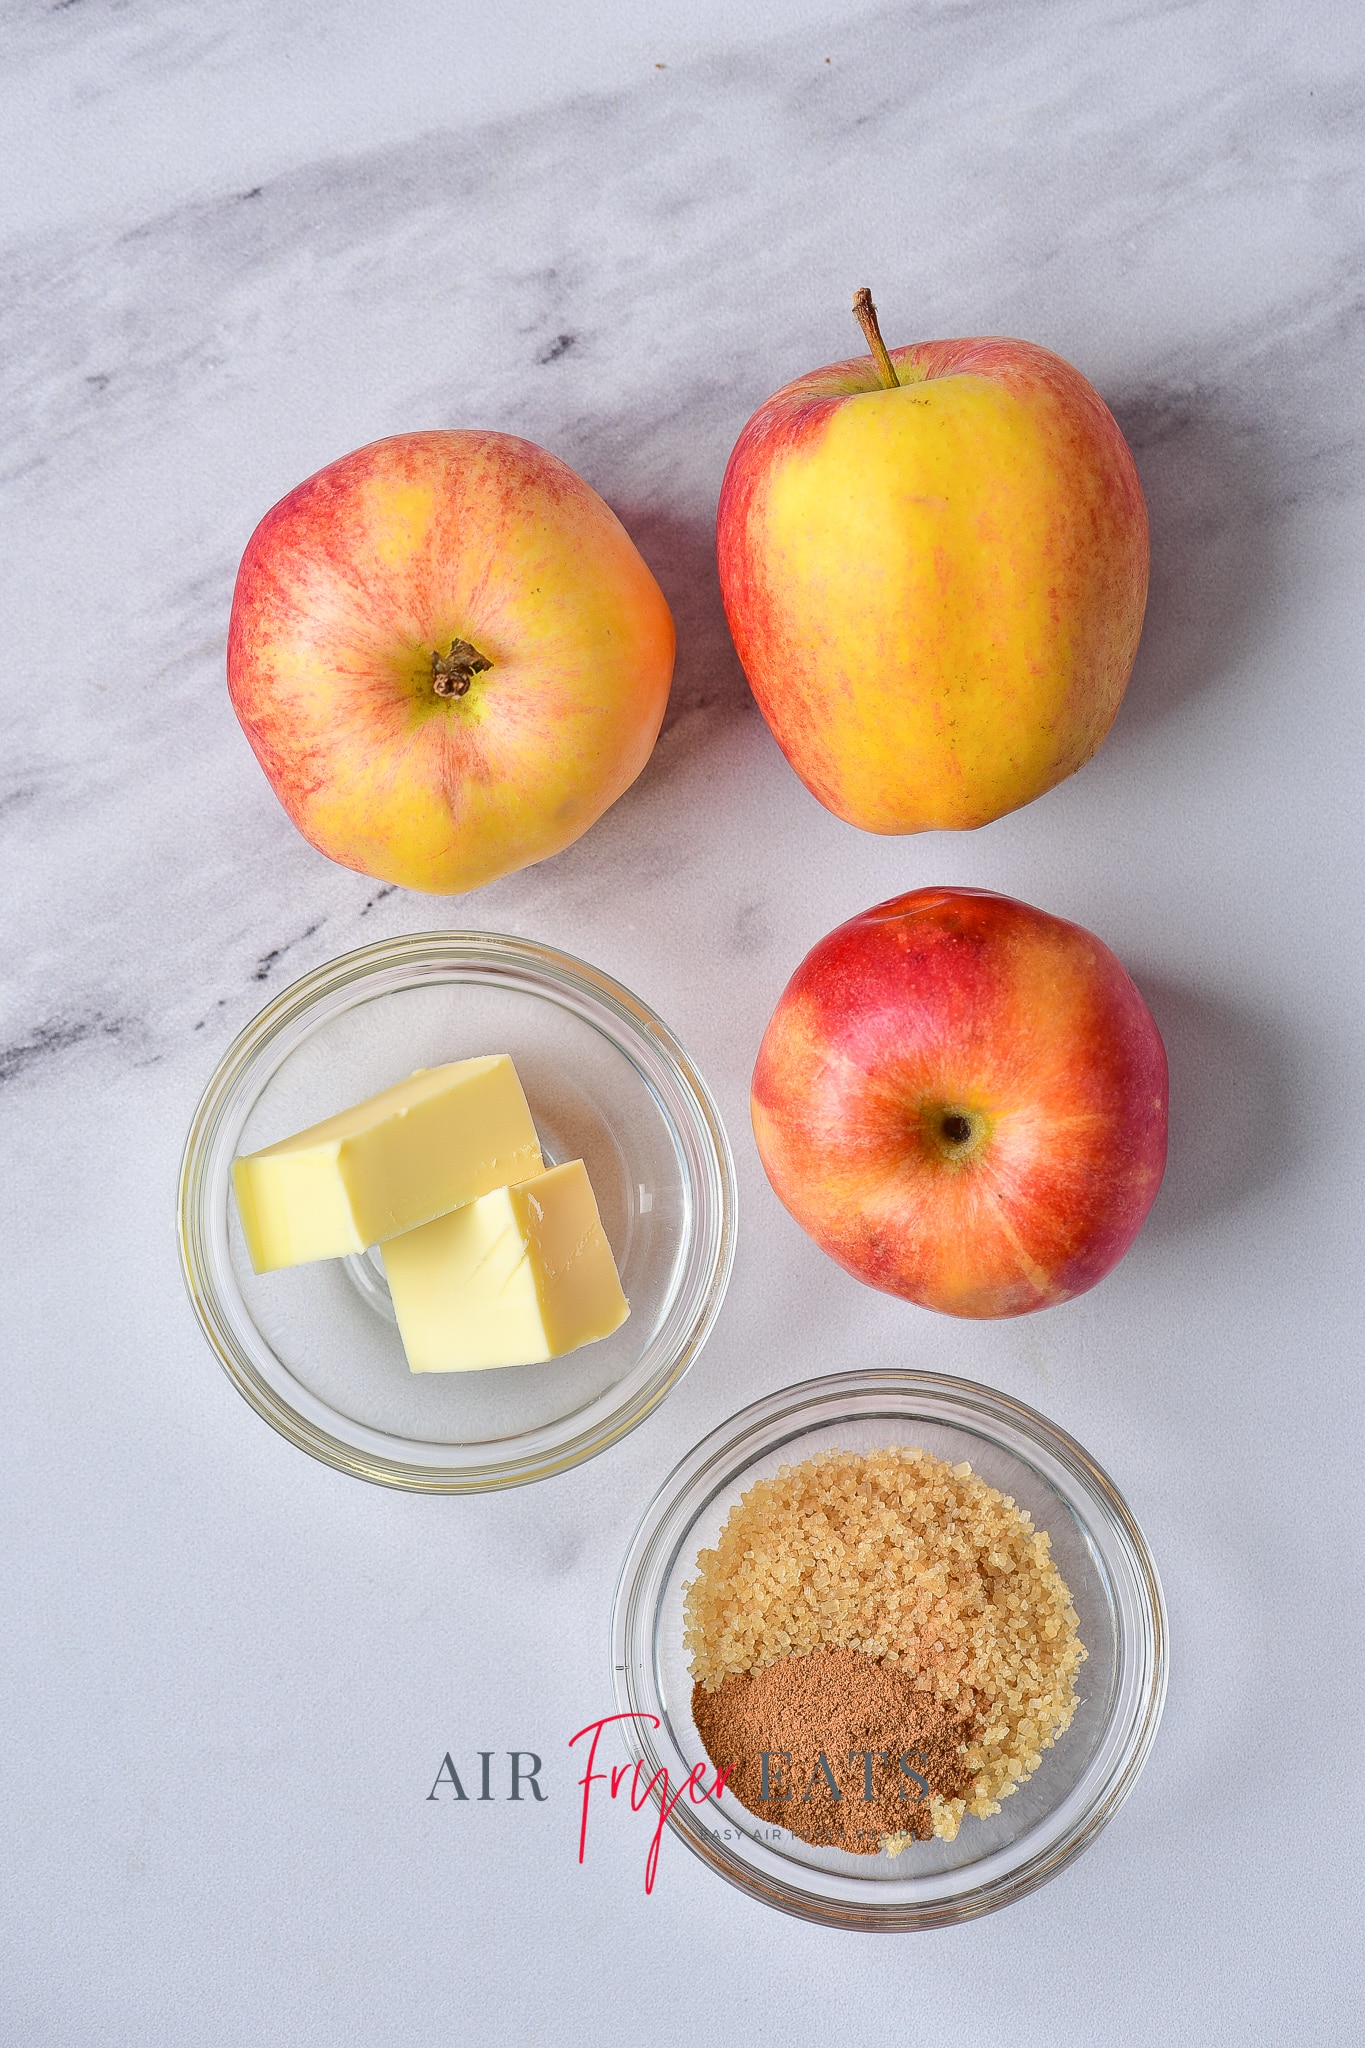 a picture showing the ingredients needed to make air fryer fired apples. The ingredient are sitting on a white, marble countertop.